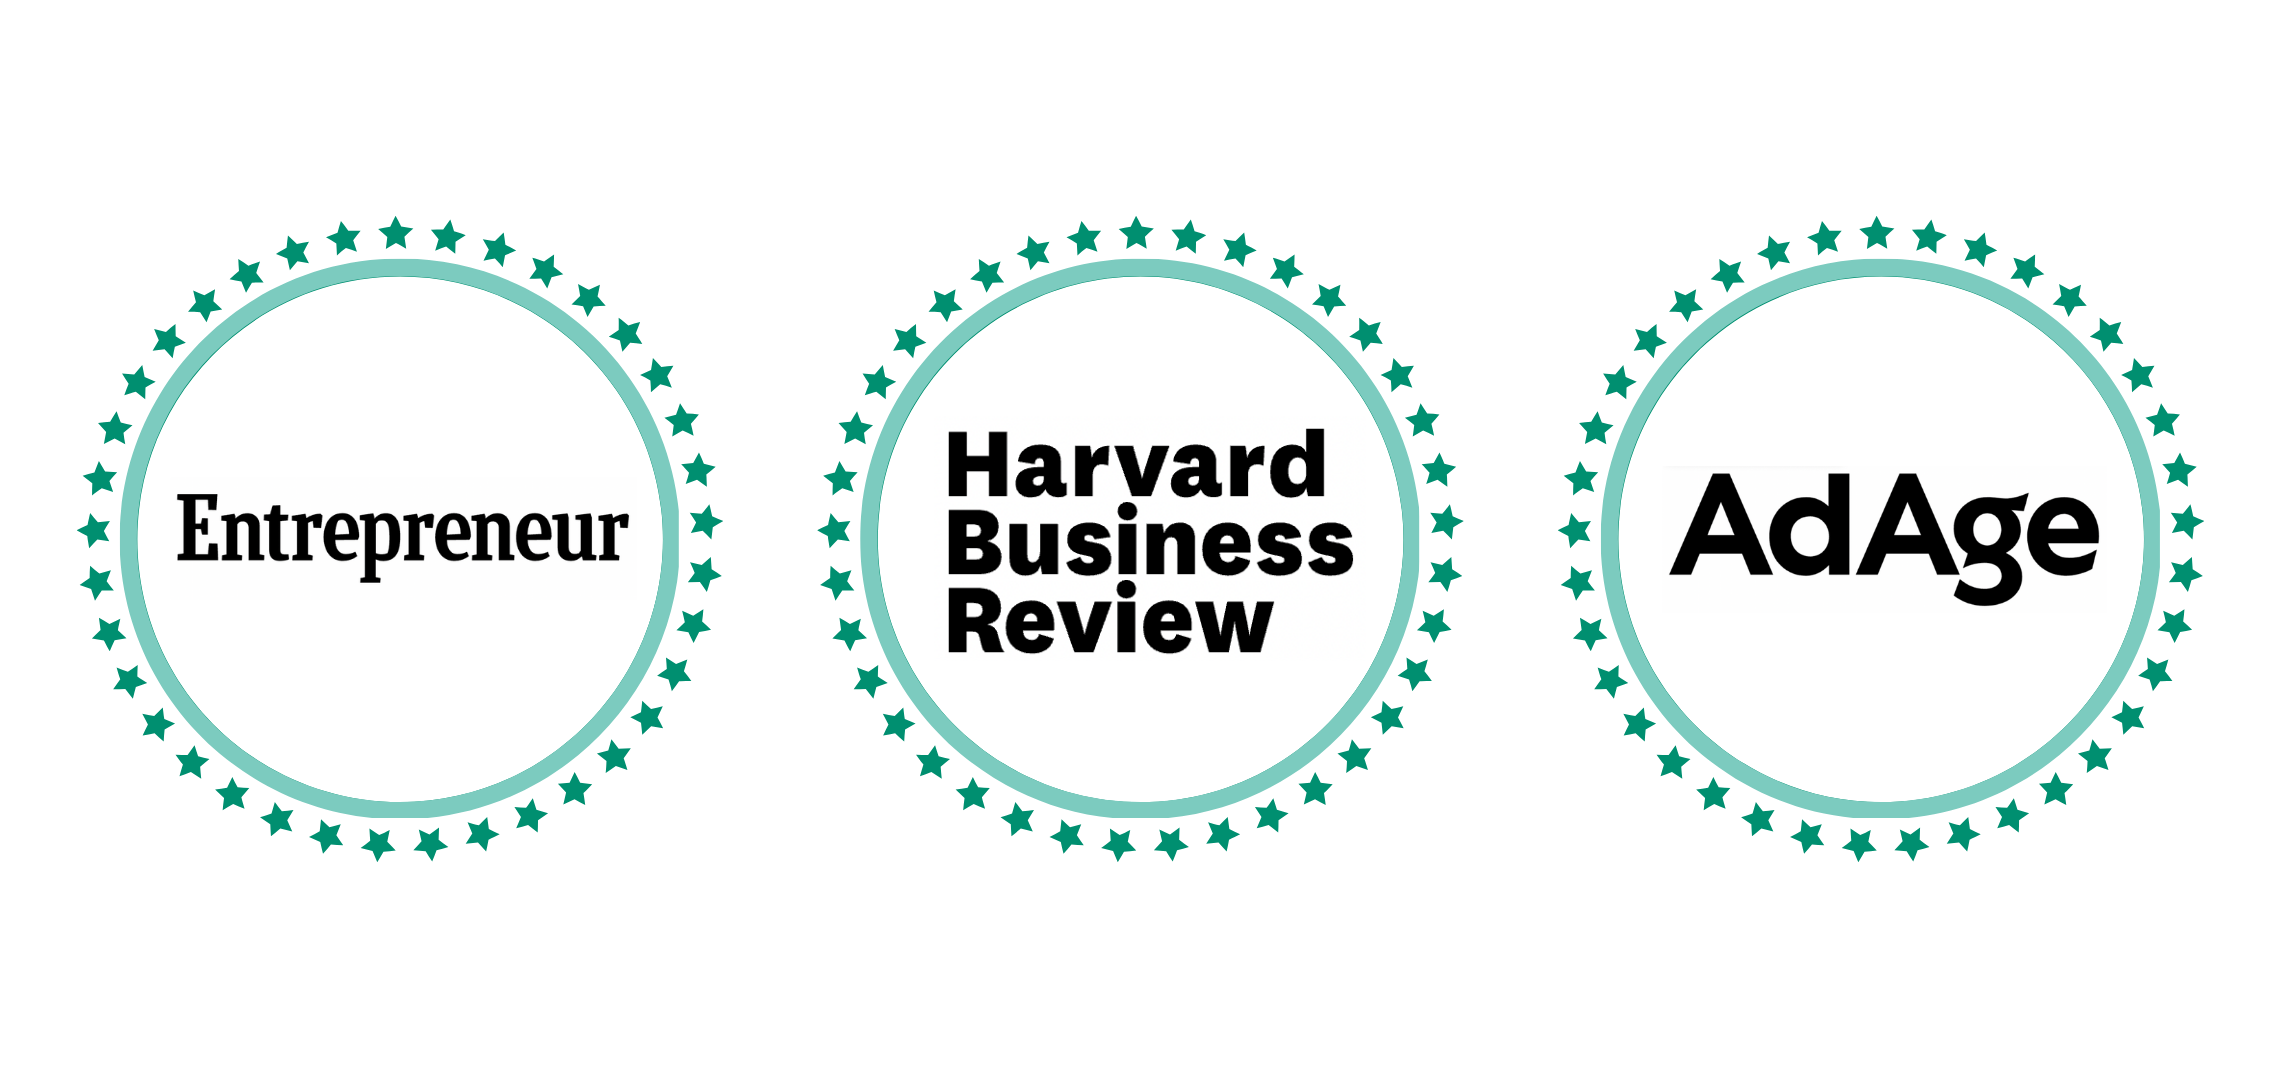 A graphic showing the logos of Entrepreneur, Harvard Business Review, and AdAge.